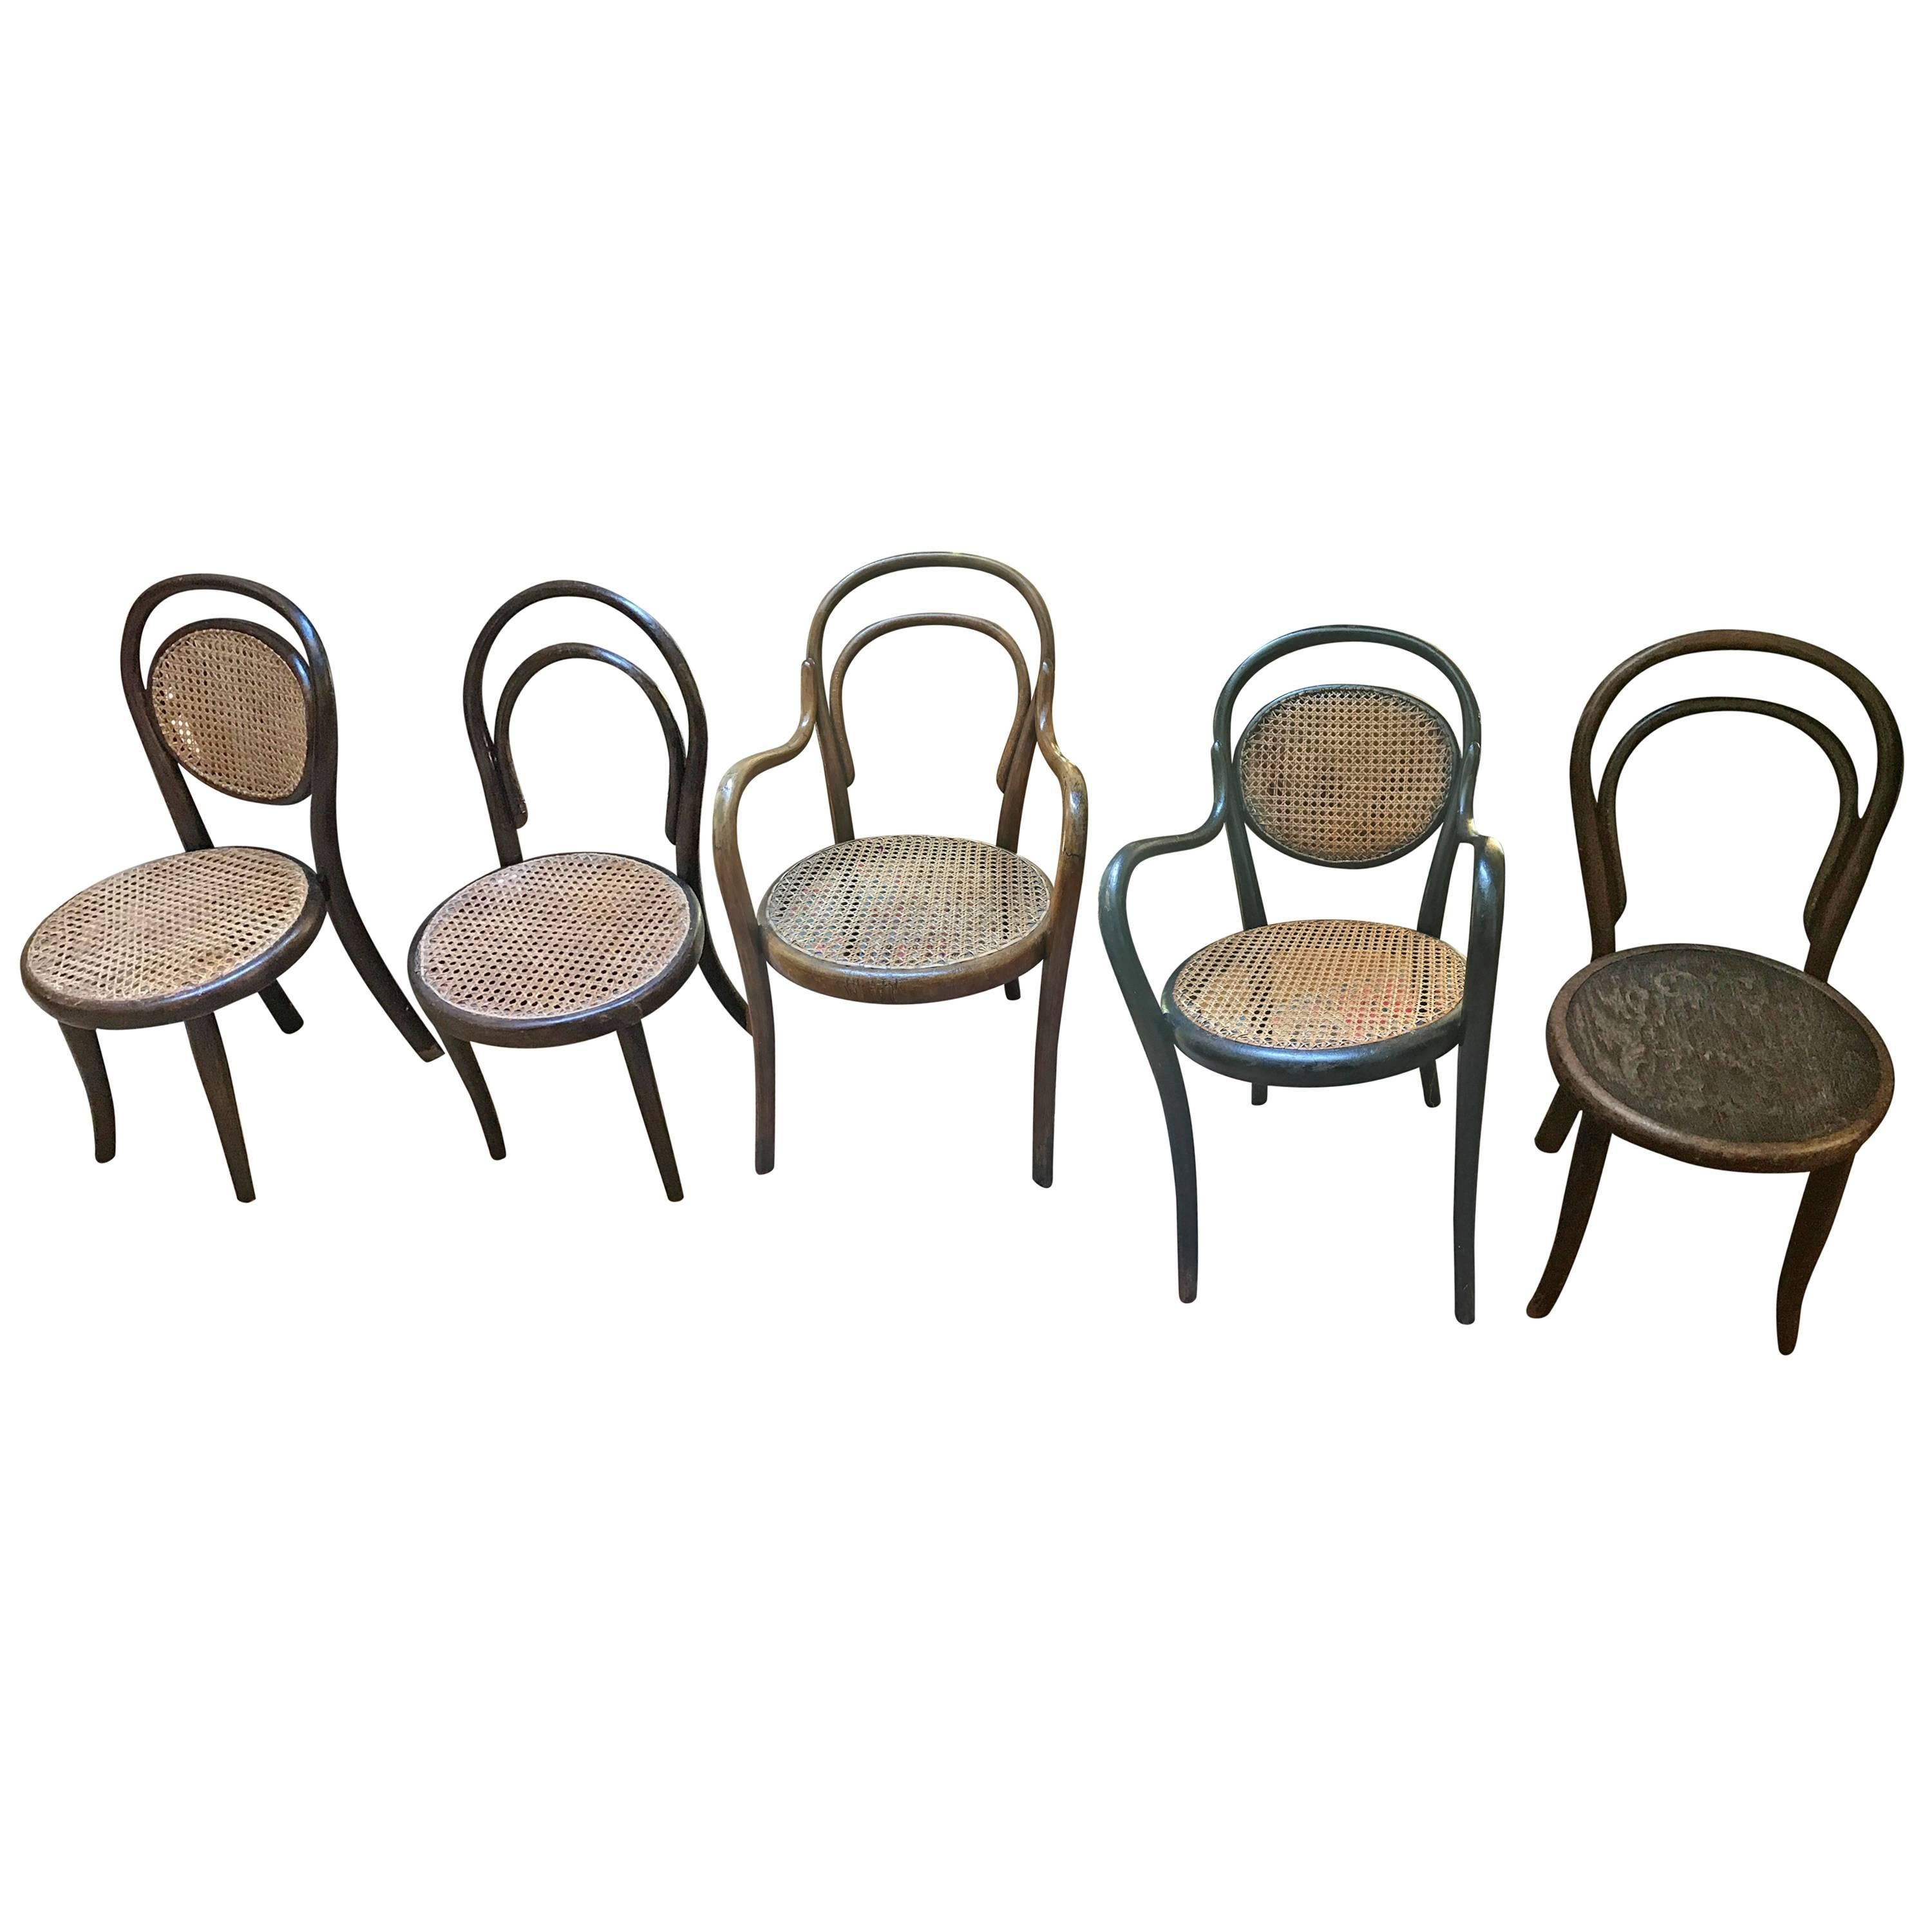 Thonet  bentwood Collection of Five   different Children’s Chairs, 1900 child